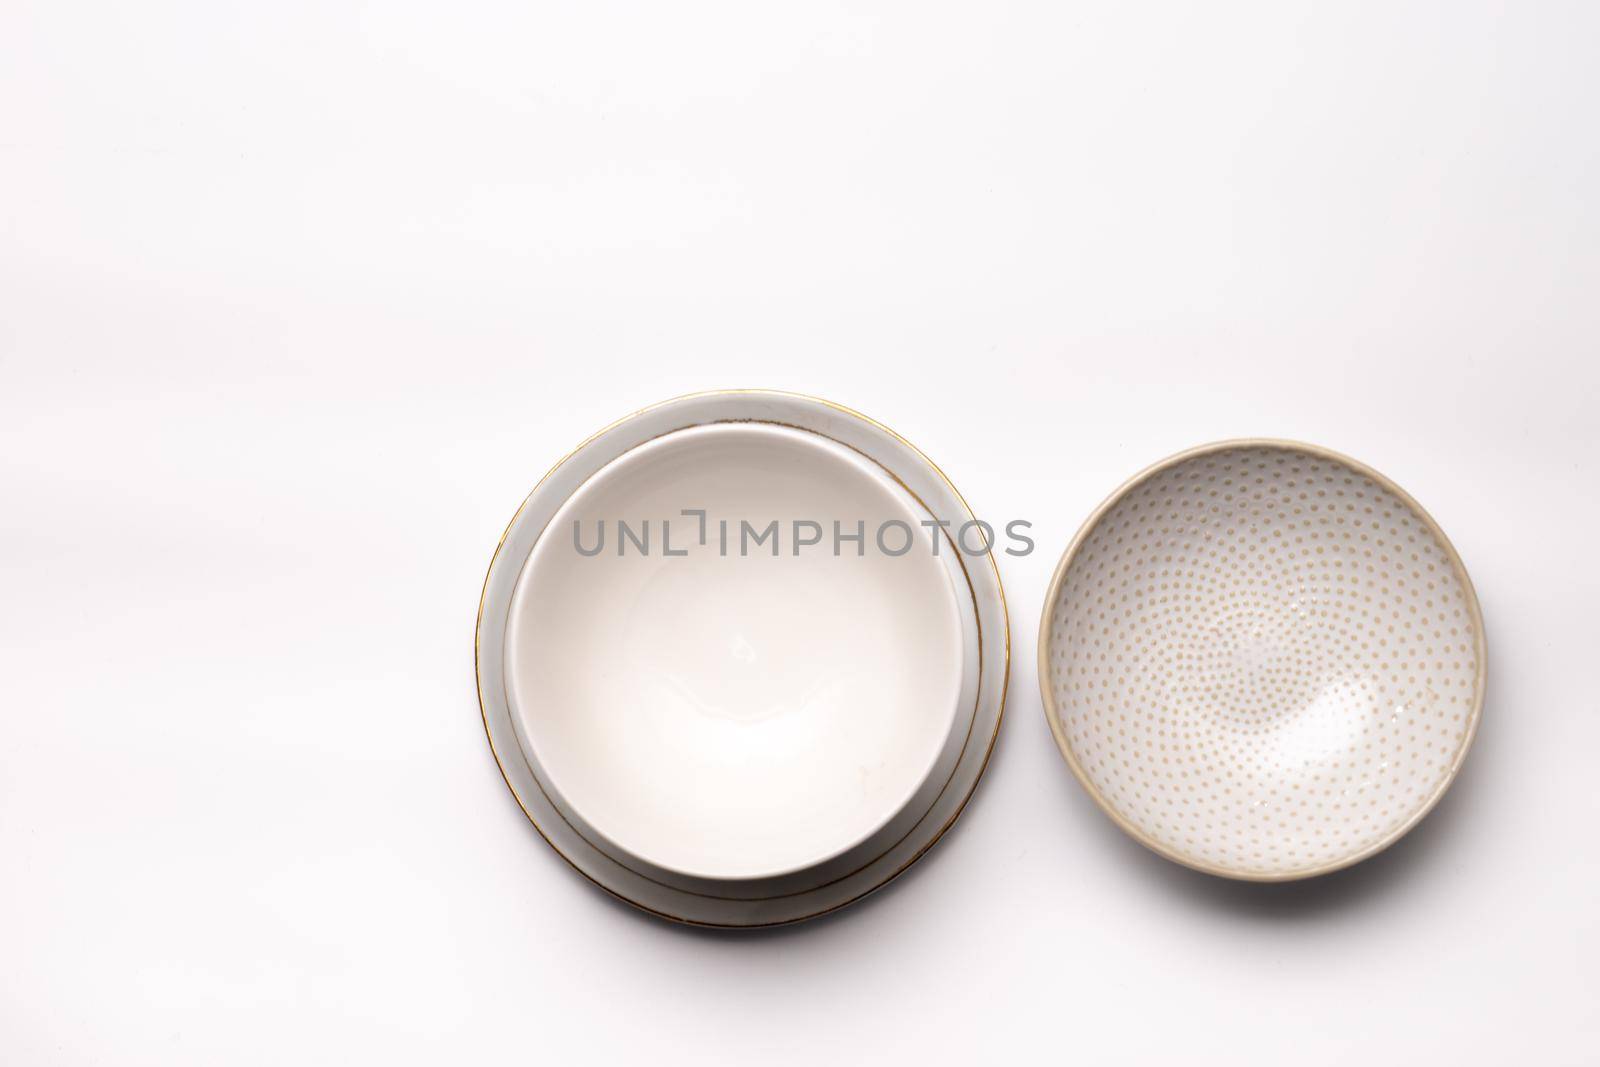 Three empty dishes or cups of blanc earthenware isolated on a white background seen from above or top view